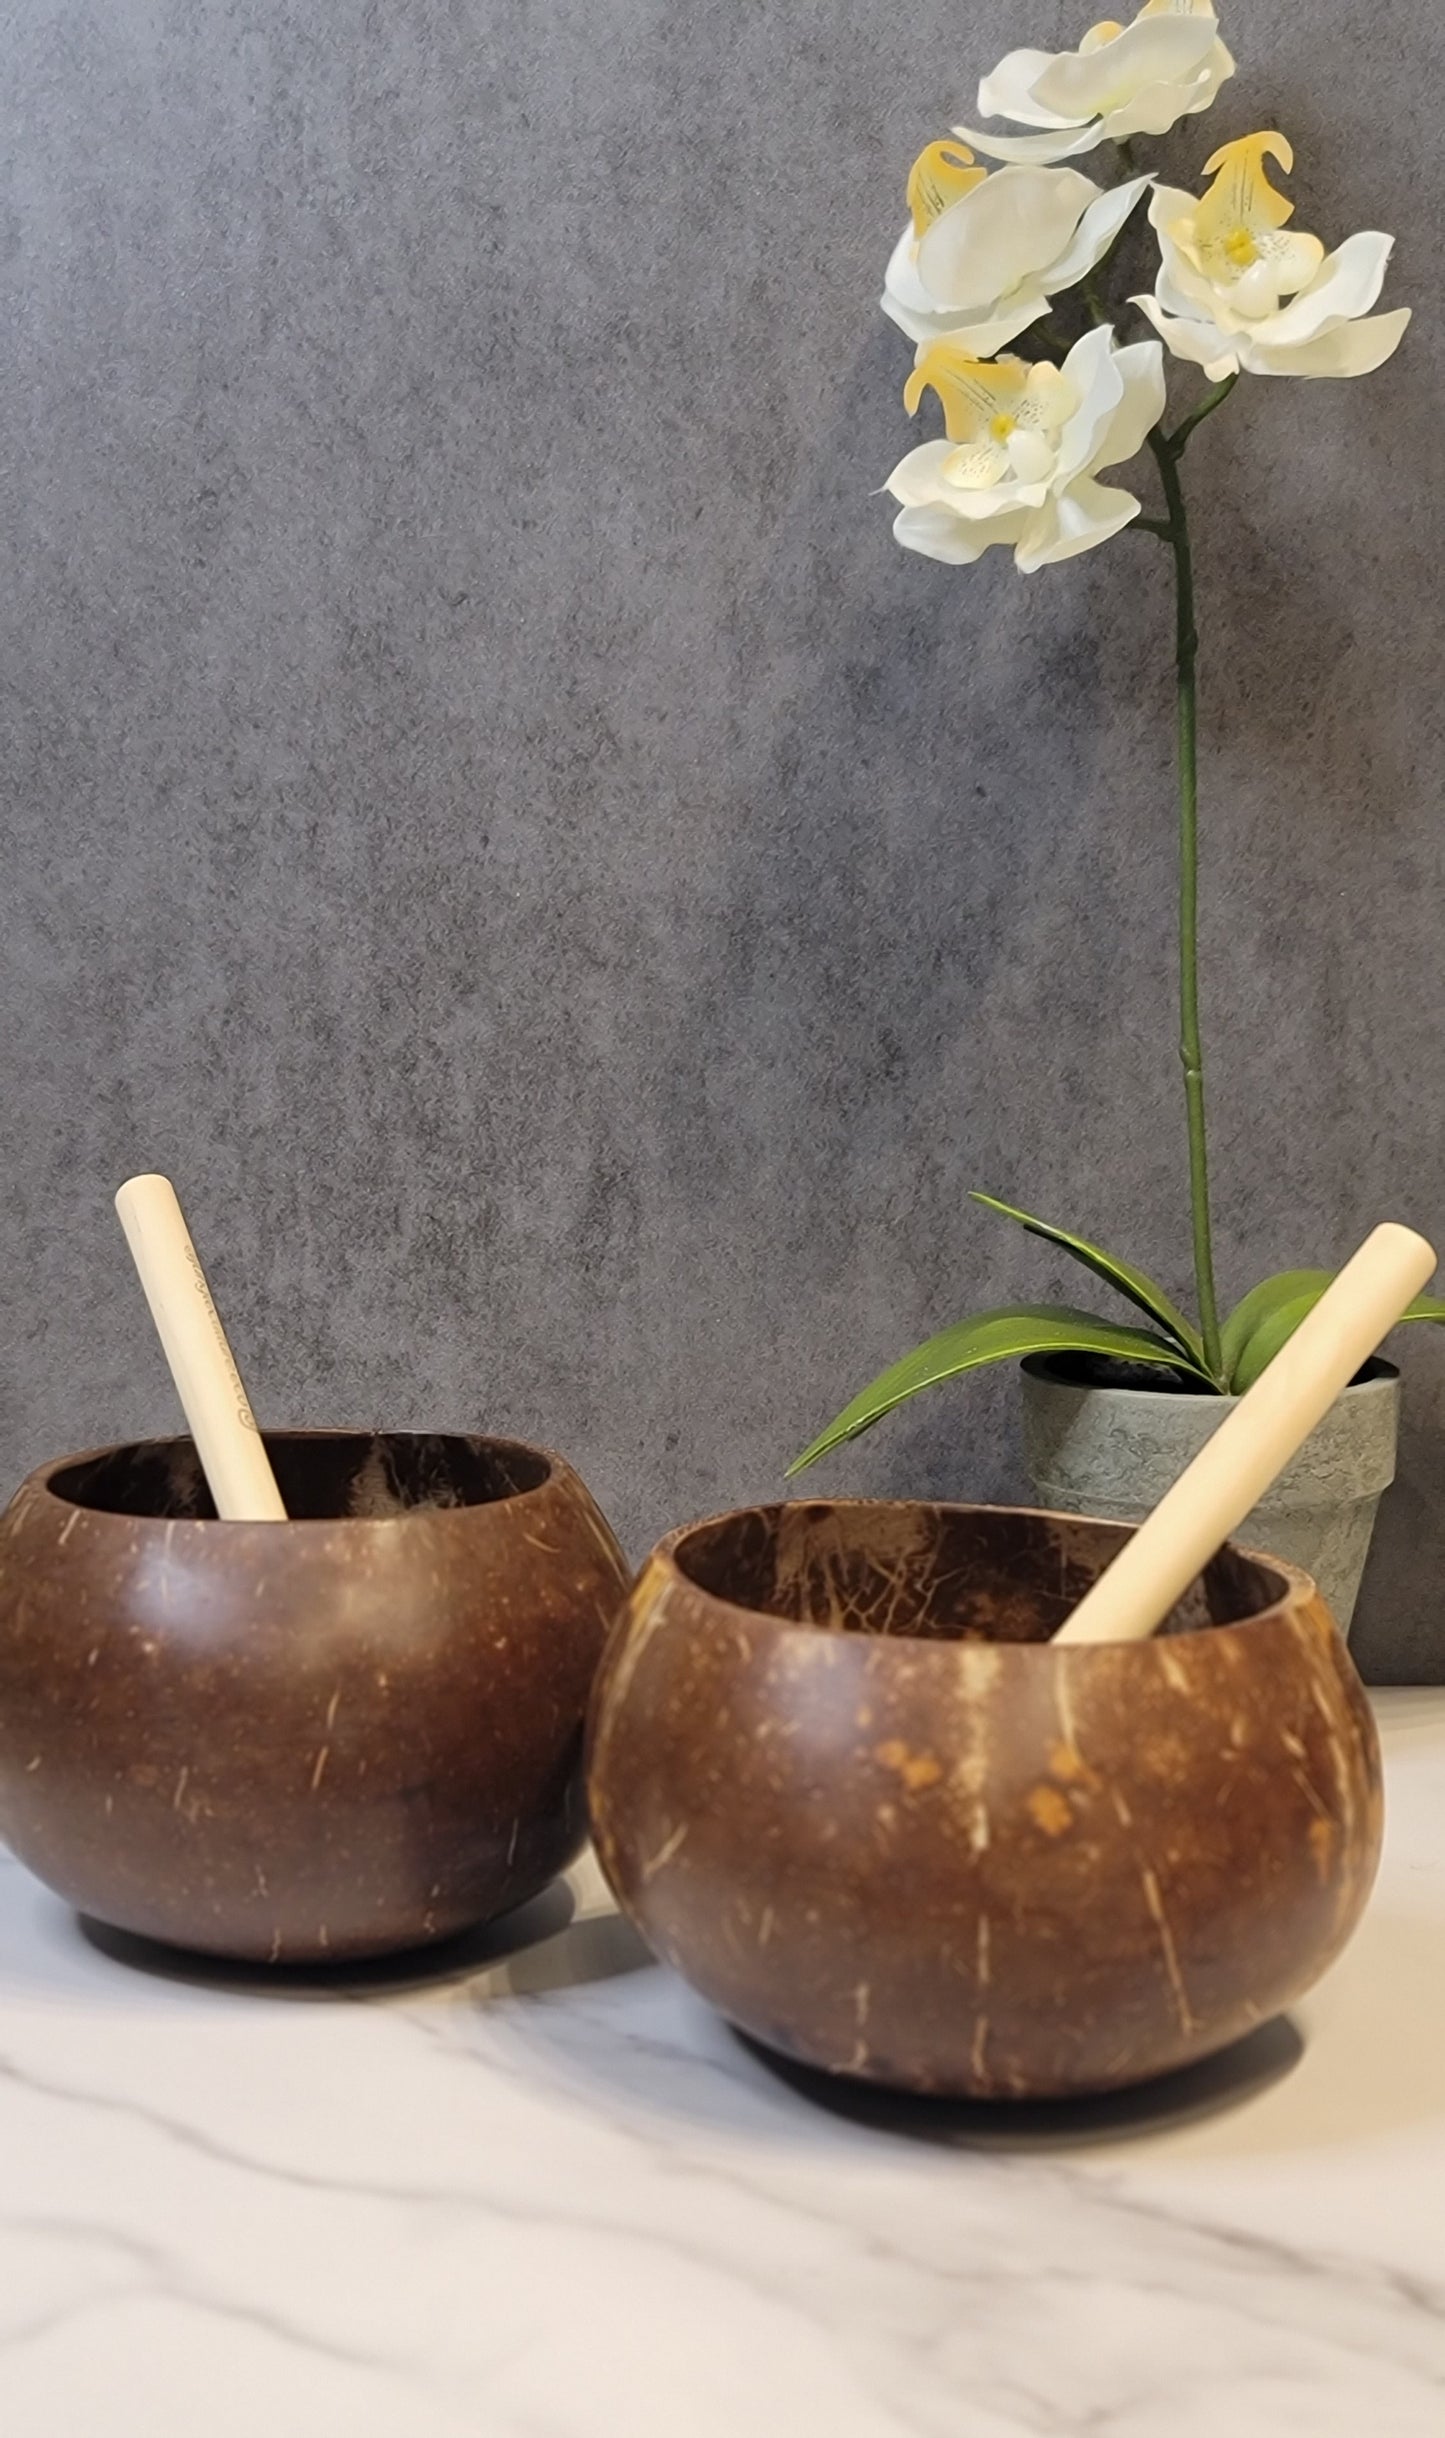 Coconut Cups, Set of 2 Coconut Shell Cups